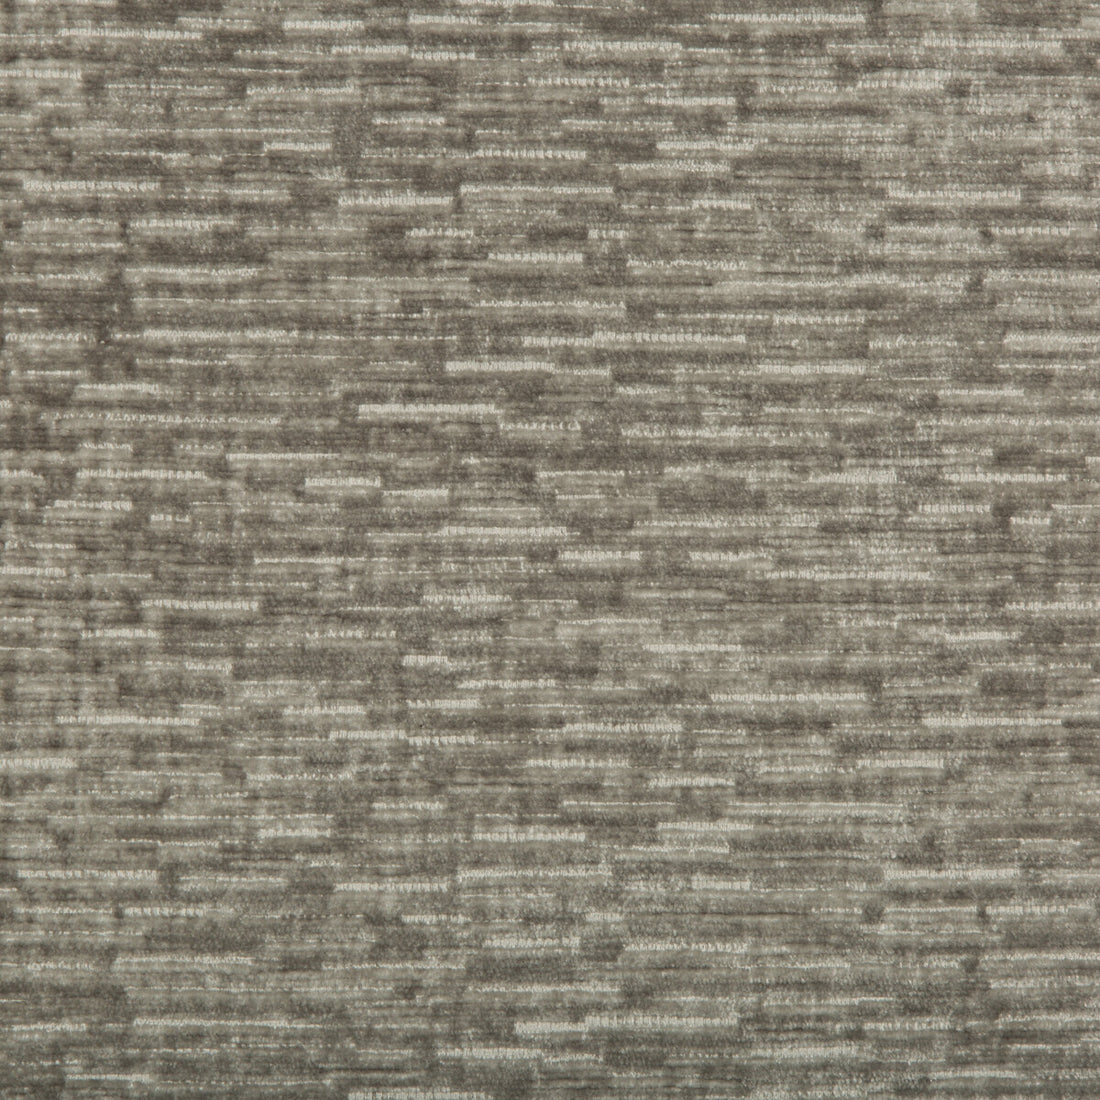 Kravet Smart fabric in 34731-11 color - pattern 34731.11.0 - by Kravet Smart in the Performance collection